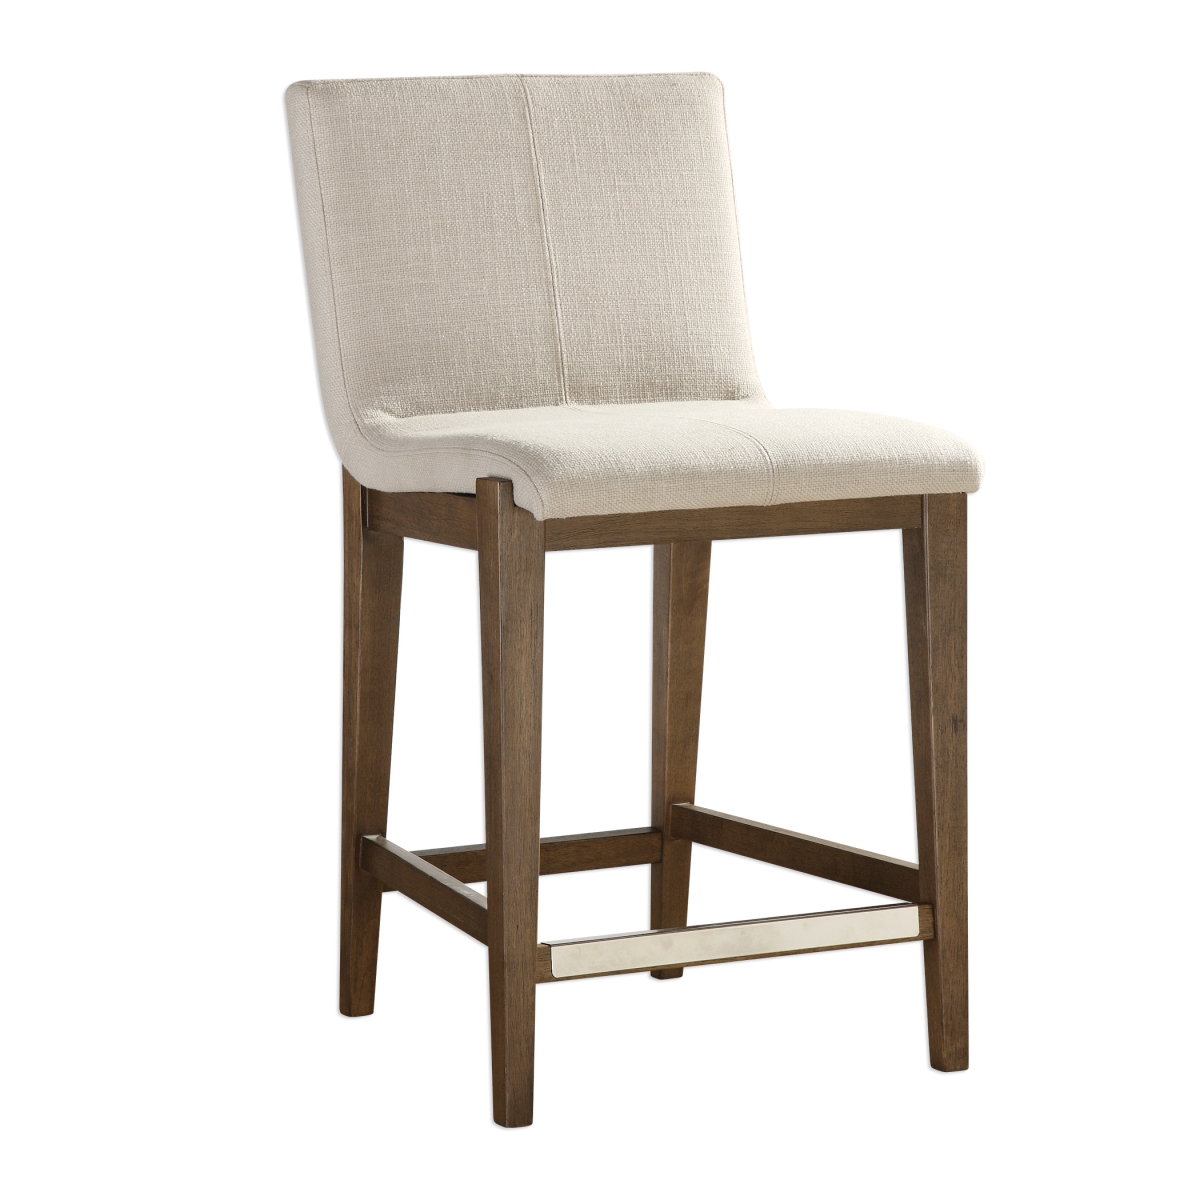 Picture of 212 Main 23390 Klemens Linen Counter Stool